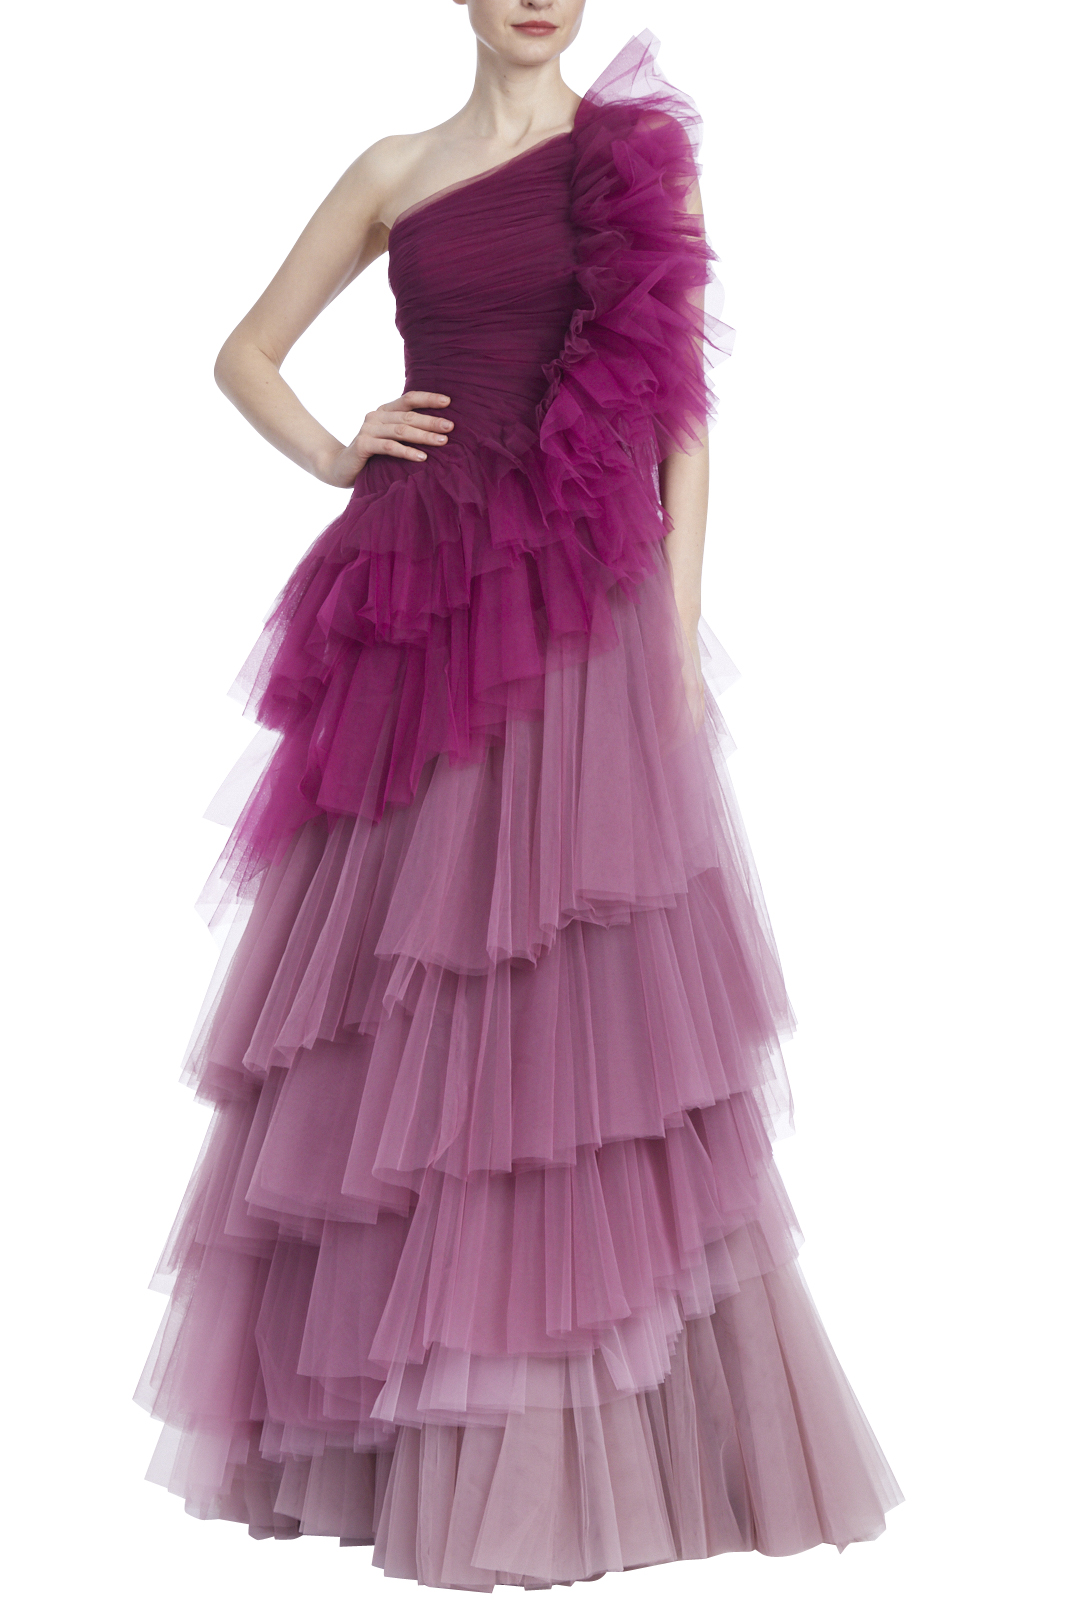 YY tulle tiered LS/K